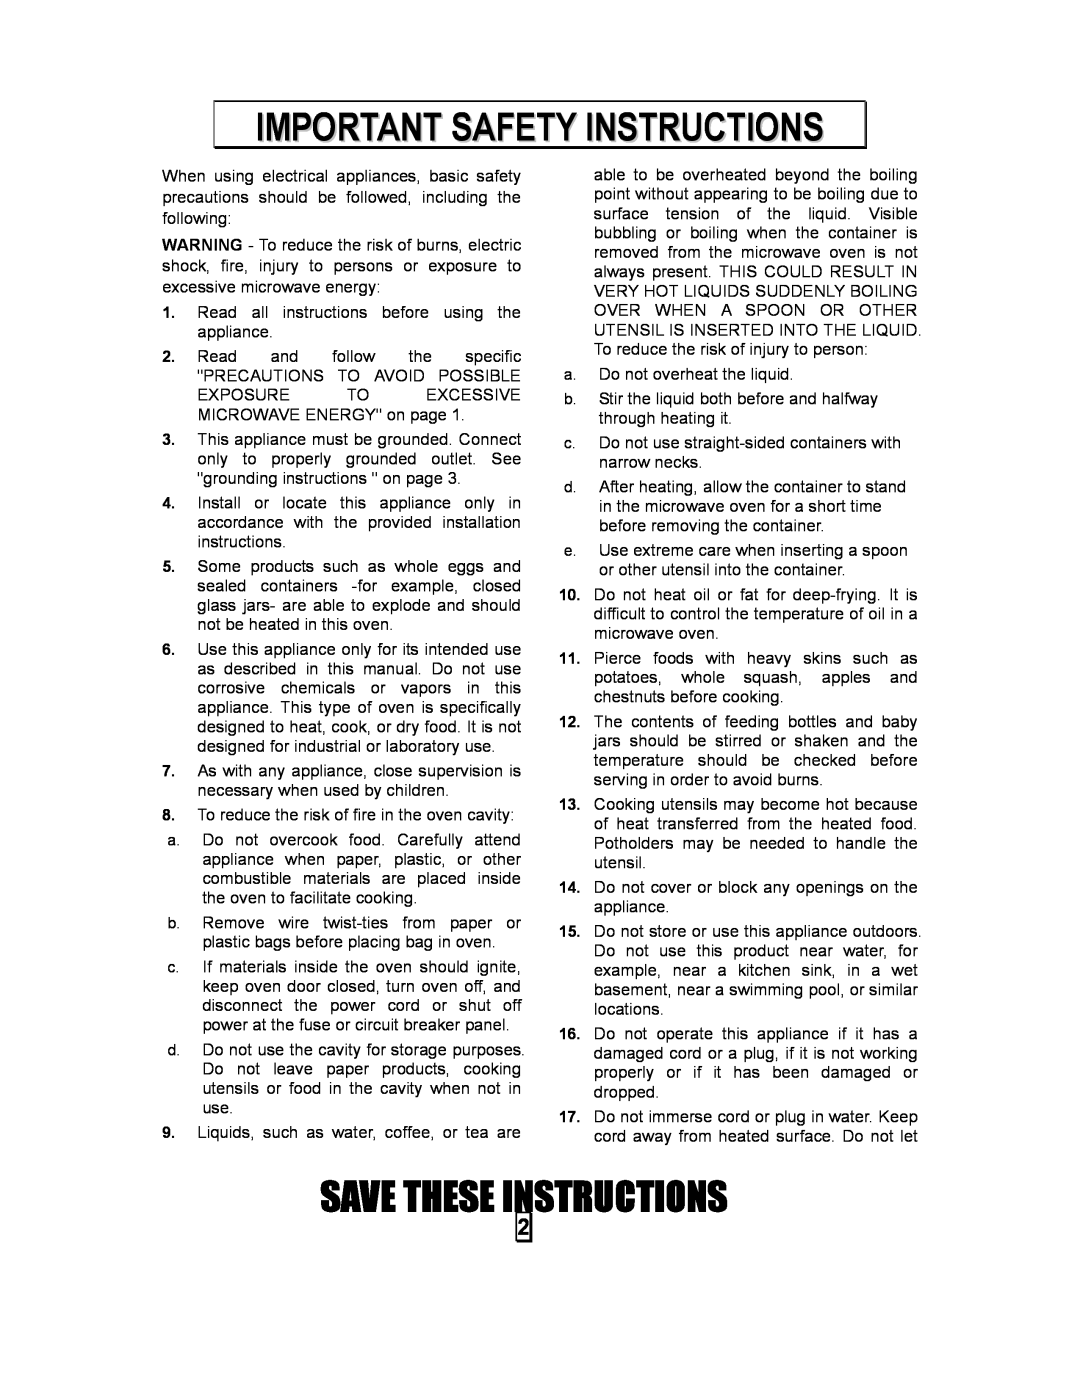 Sears 86030 user manual Save These Instructions, Important Safety Instructions 